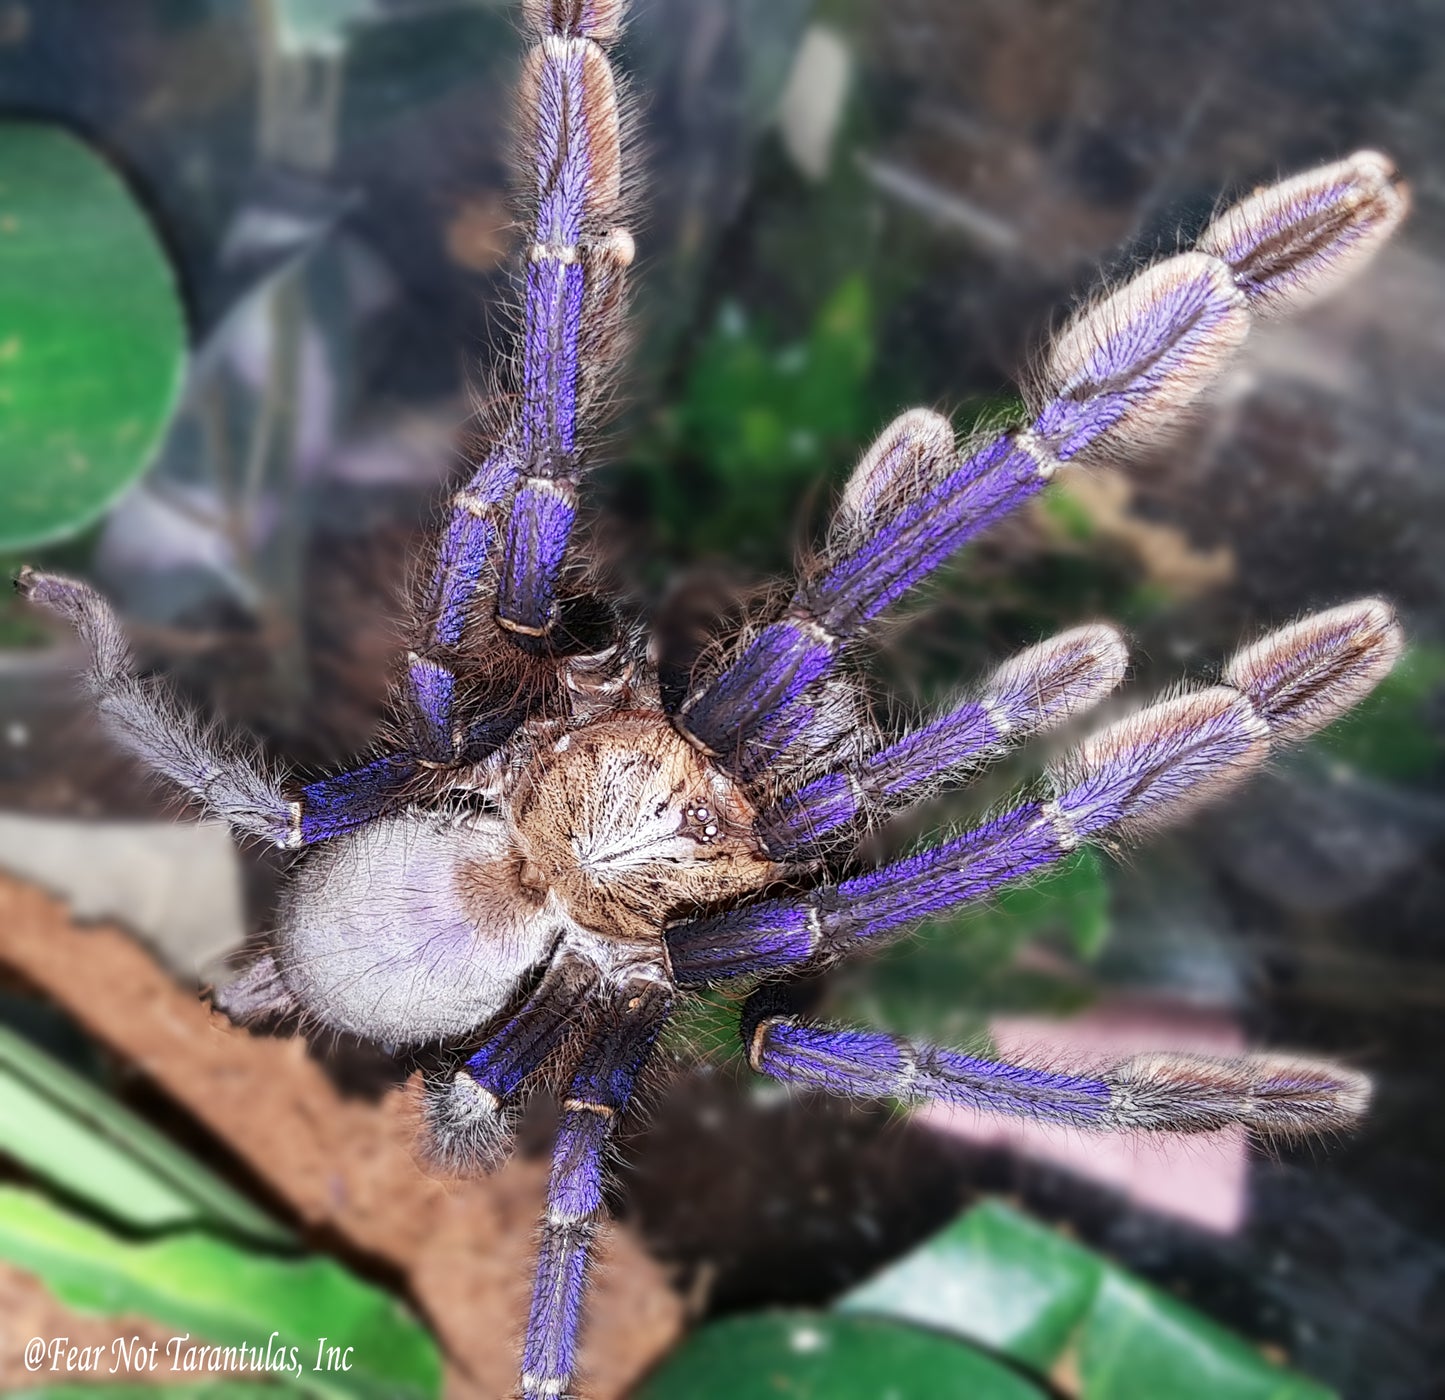 Omothymus violaceopes (Singapore Blue Tarantula) about 1" FREE for orders $225 and over (after discounts and does not include shipping) One freebie per shipment